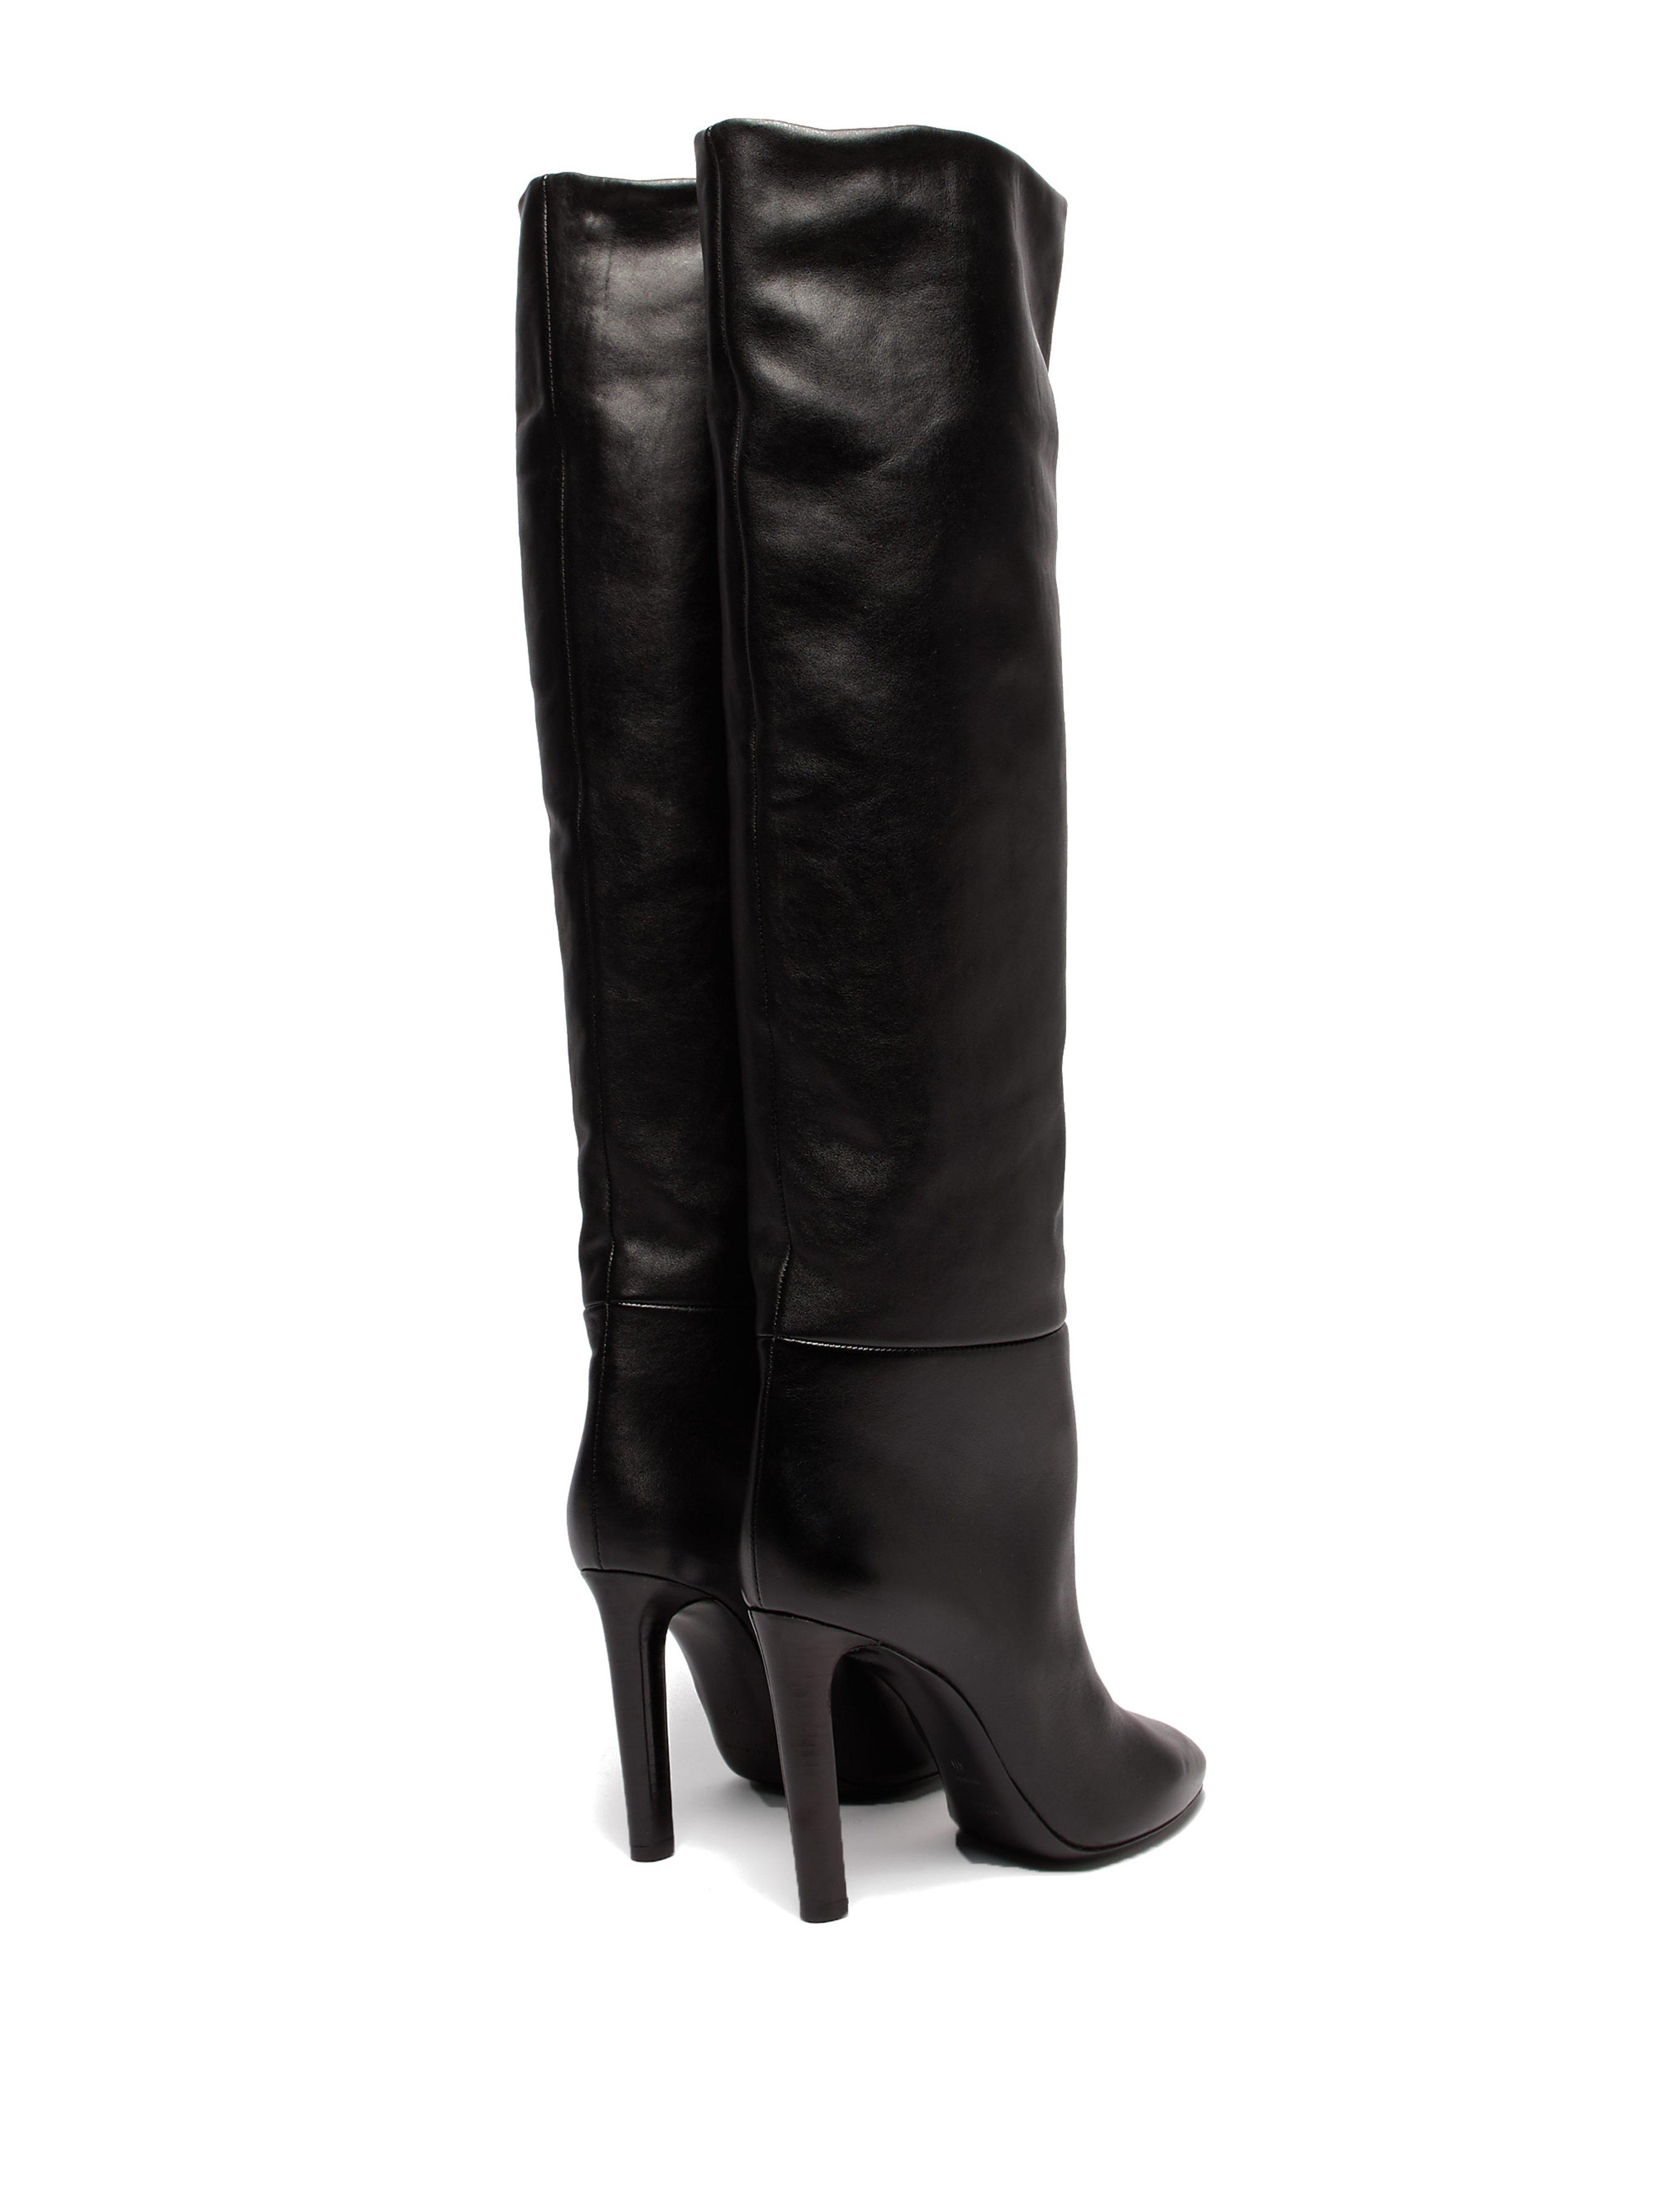 Saint Laurent Kate Knee High Leather Boots in Black - Lyst